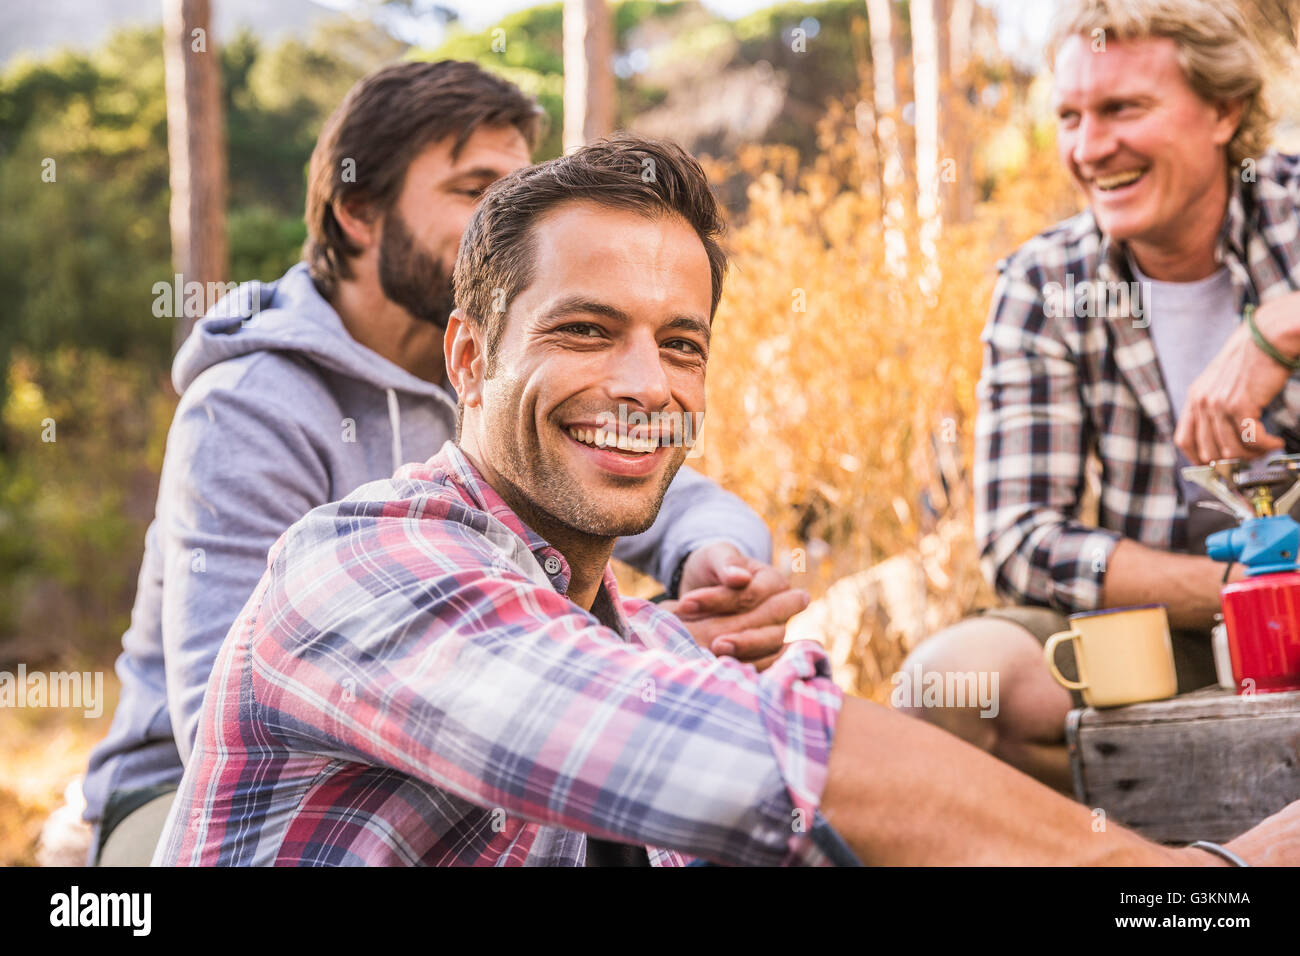 Three men cooking on camping stove in forest, Deer Park, Cape Town, South Africa Stock Photo